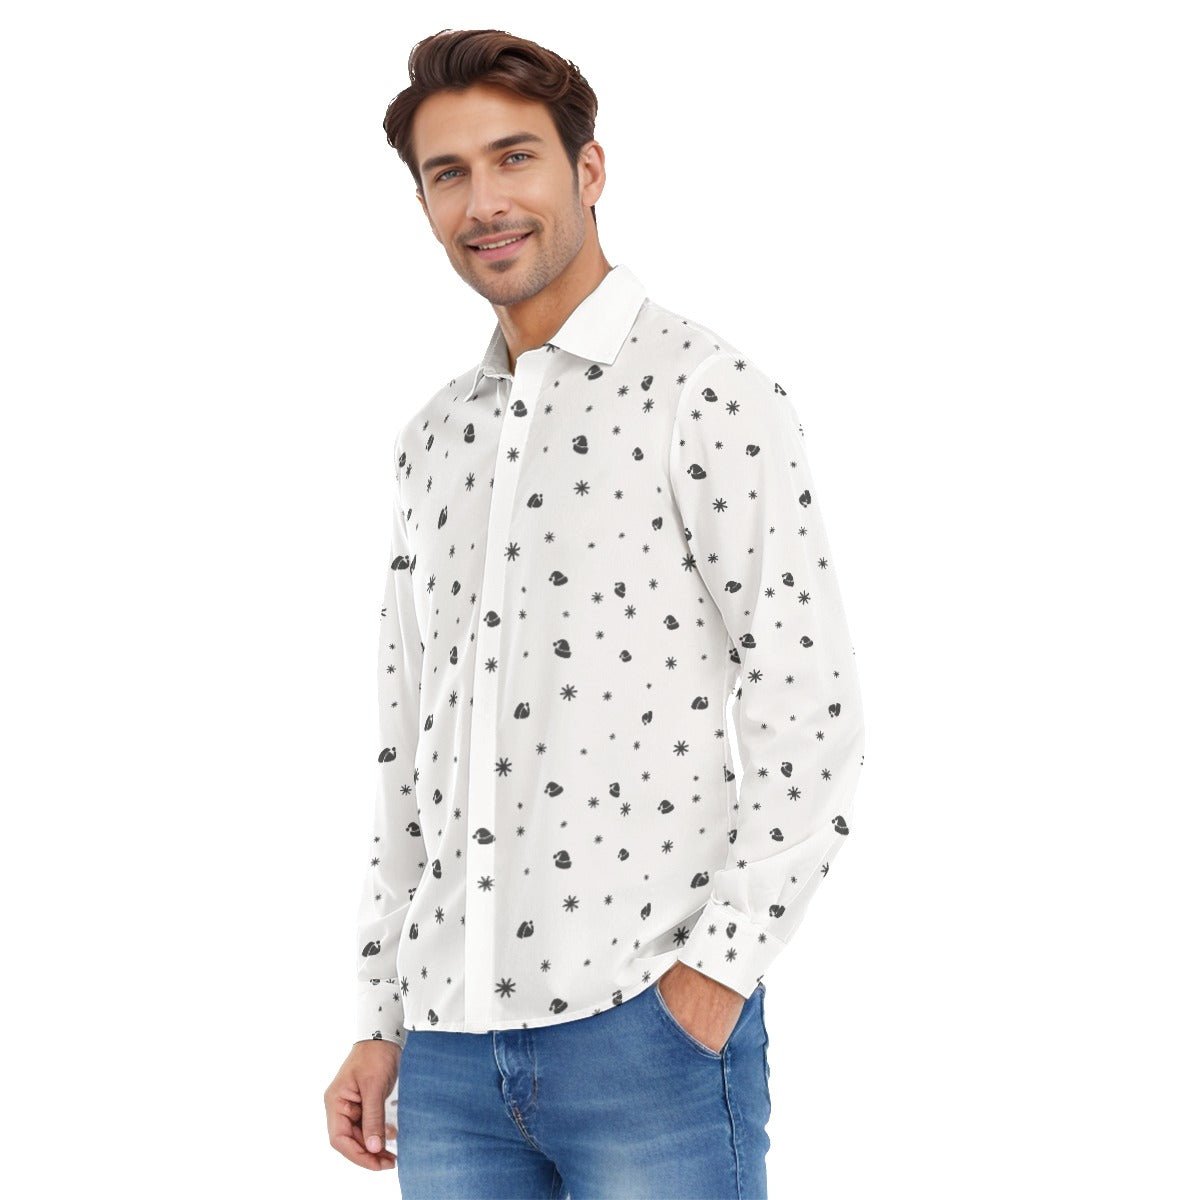 Men's Collar Christmas Shirt - Snowflakes and Hats - Festive Style